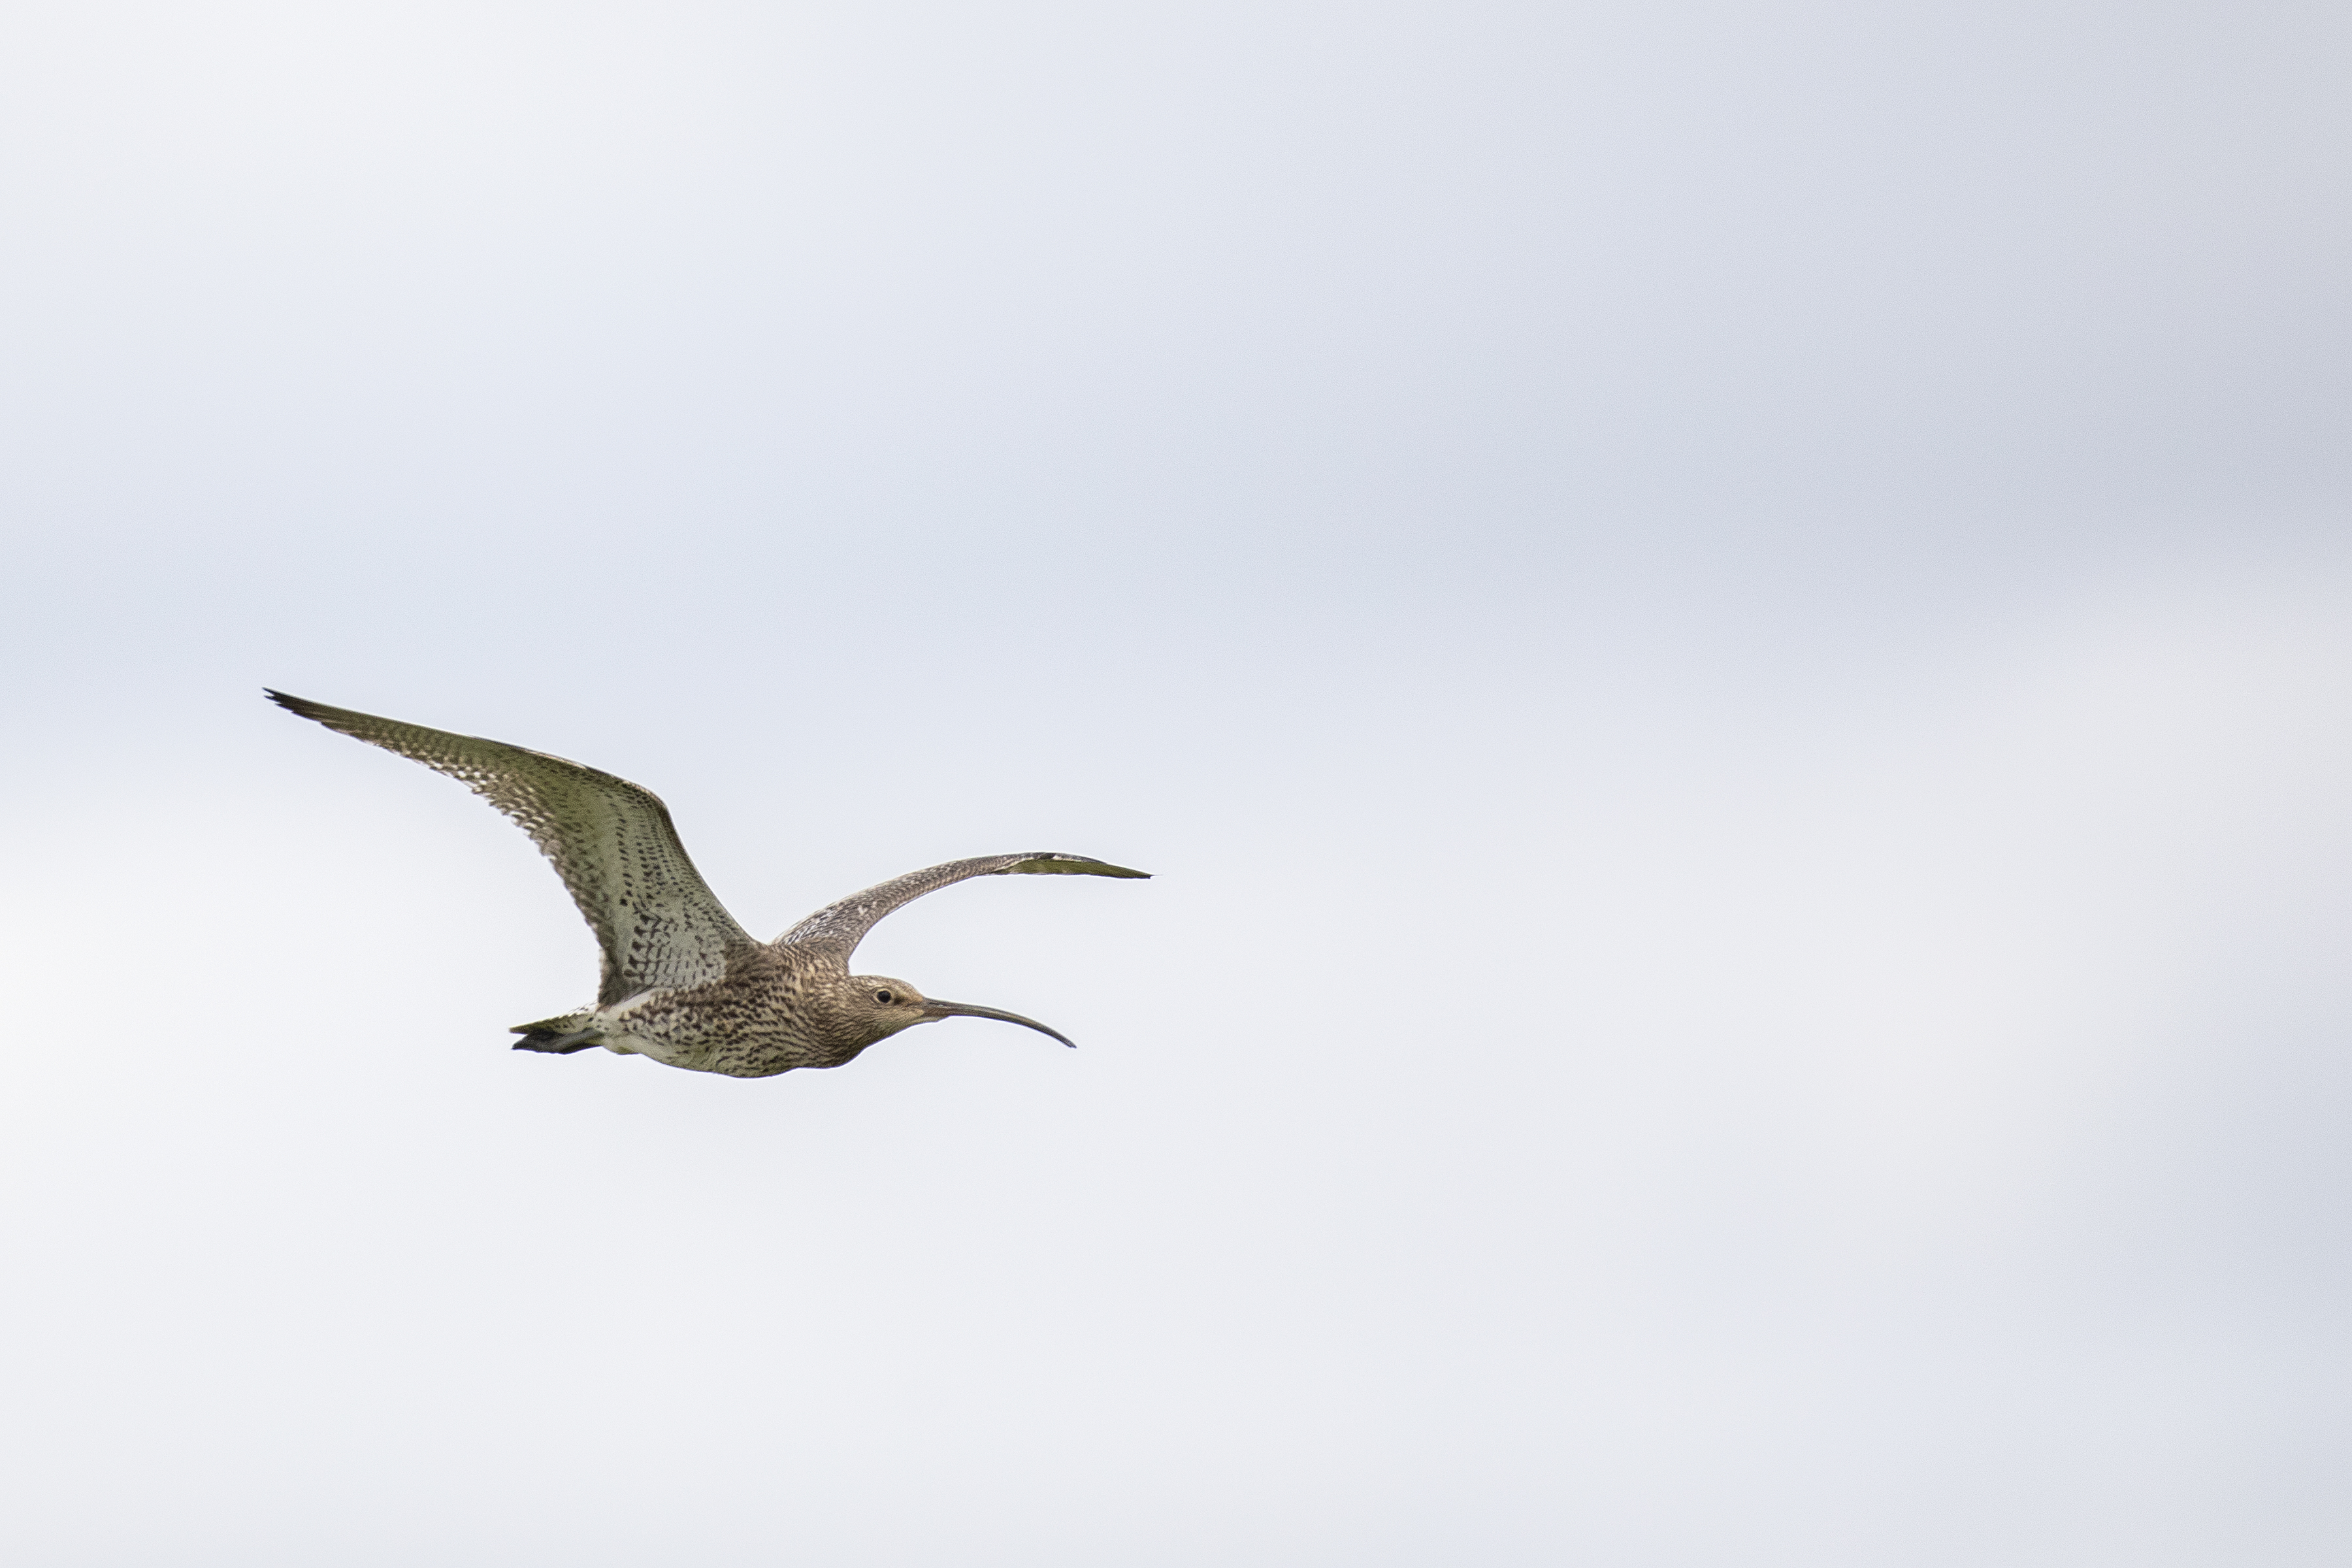 A curlew in flight